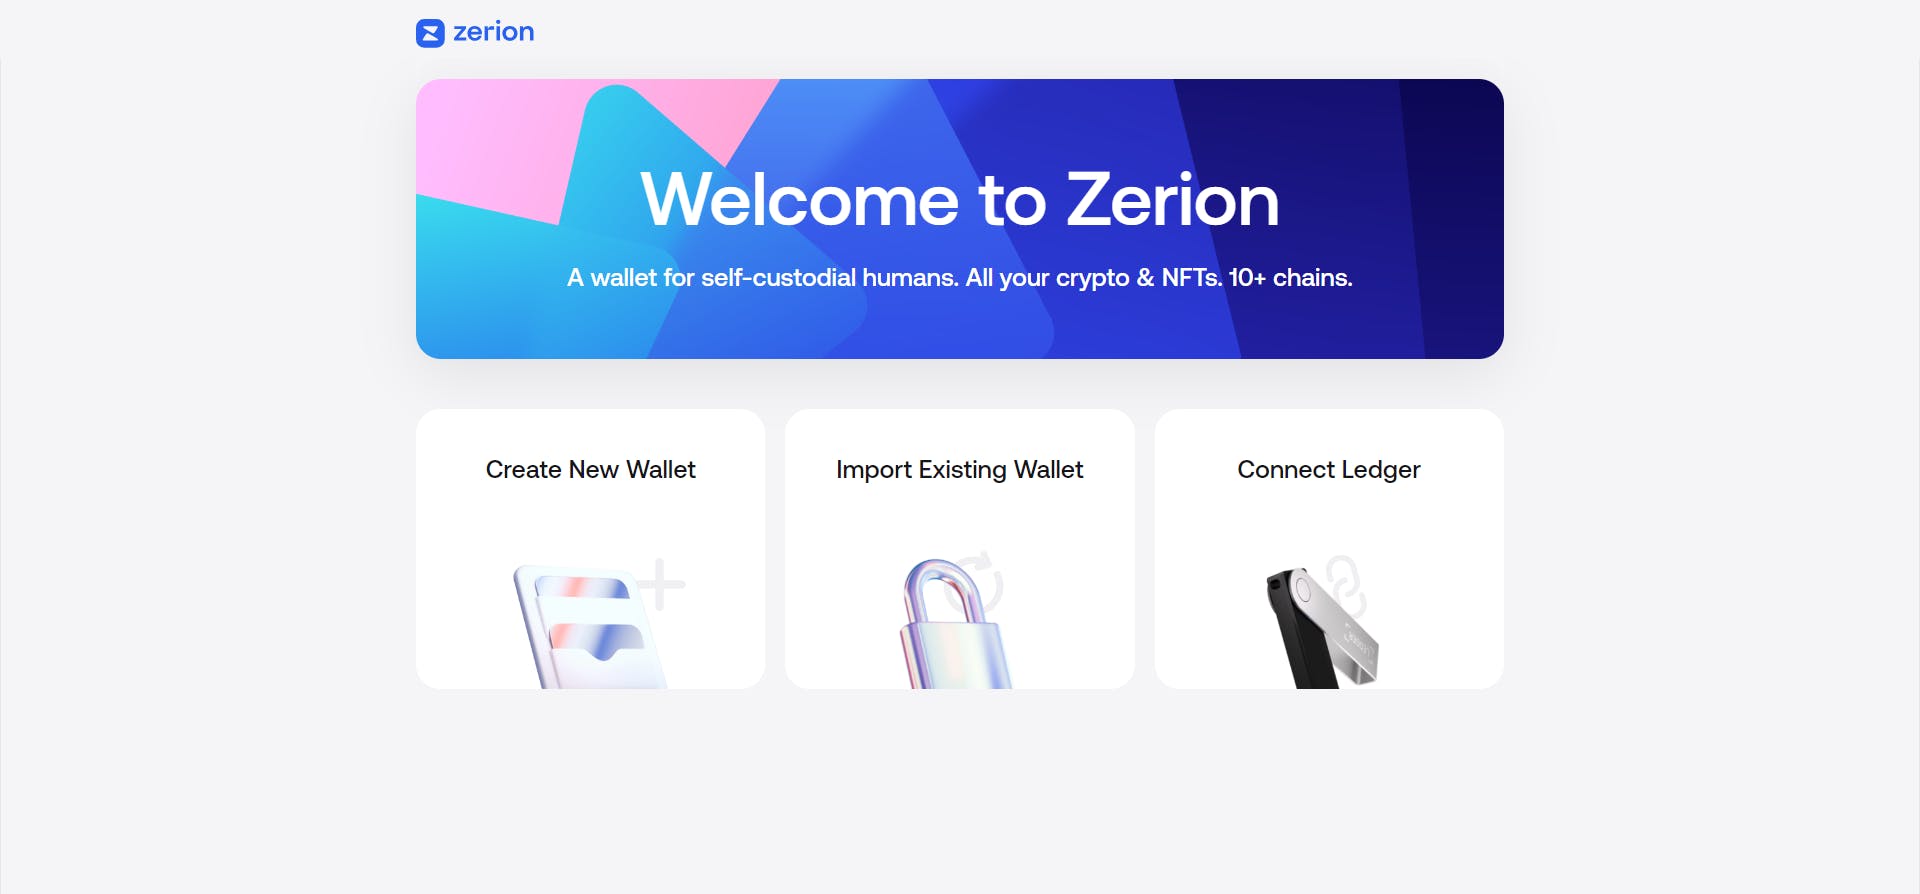 Options Zerion provides for you to setup your wallet on PC